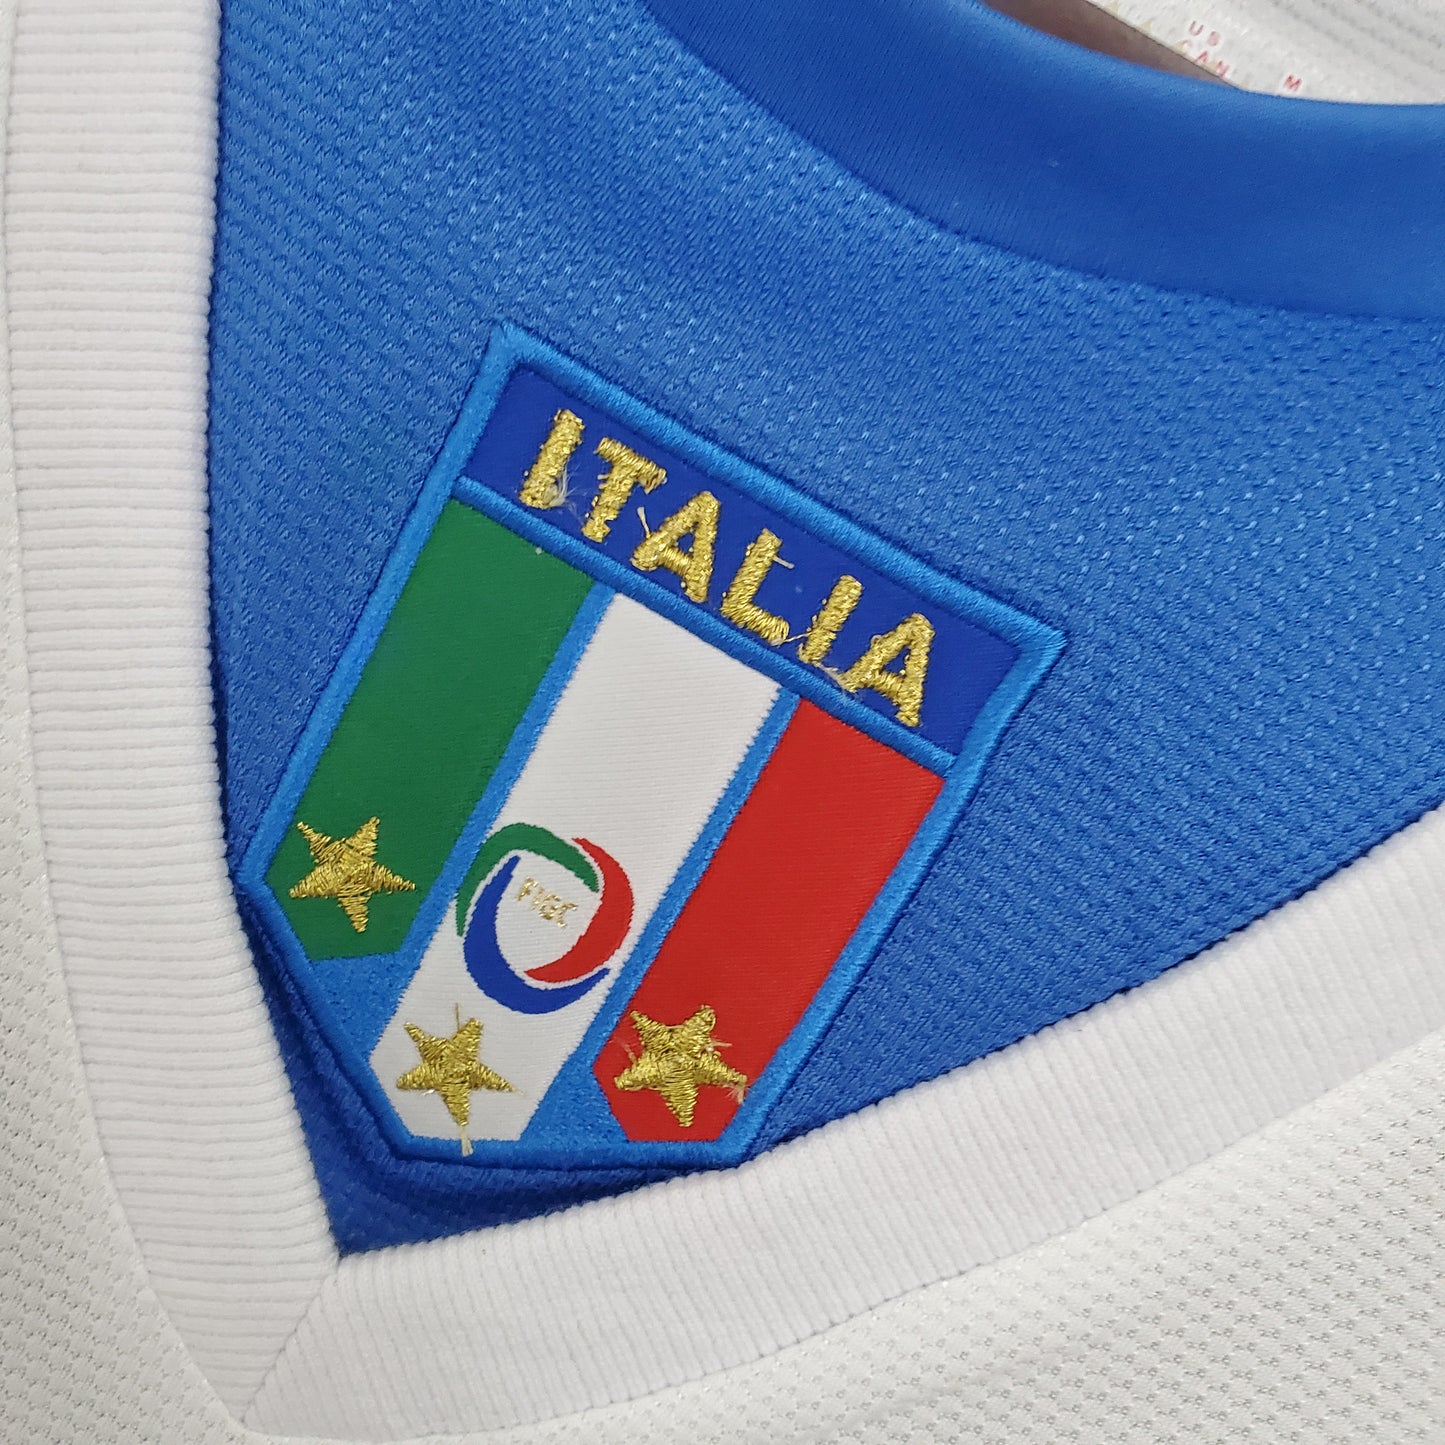 Italy 2006 Away Jersey - World Cup Winners